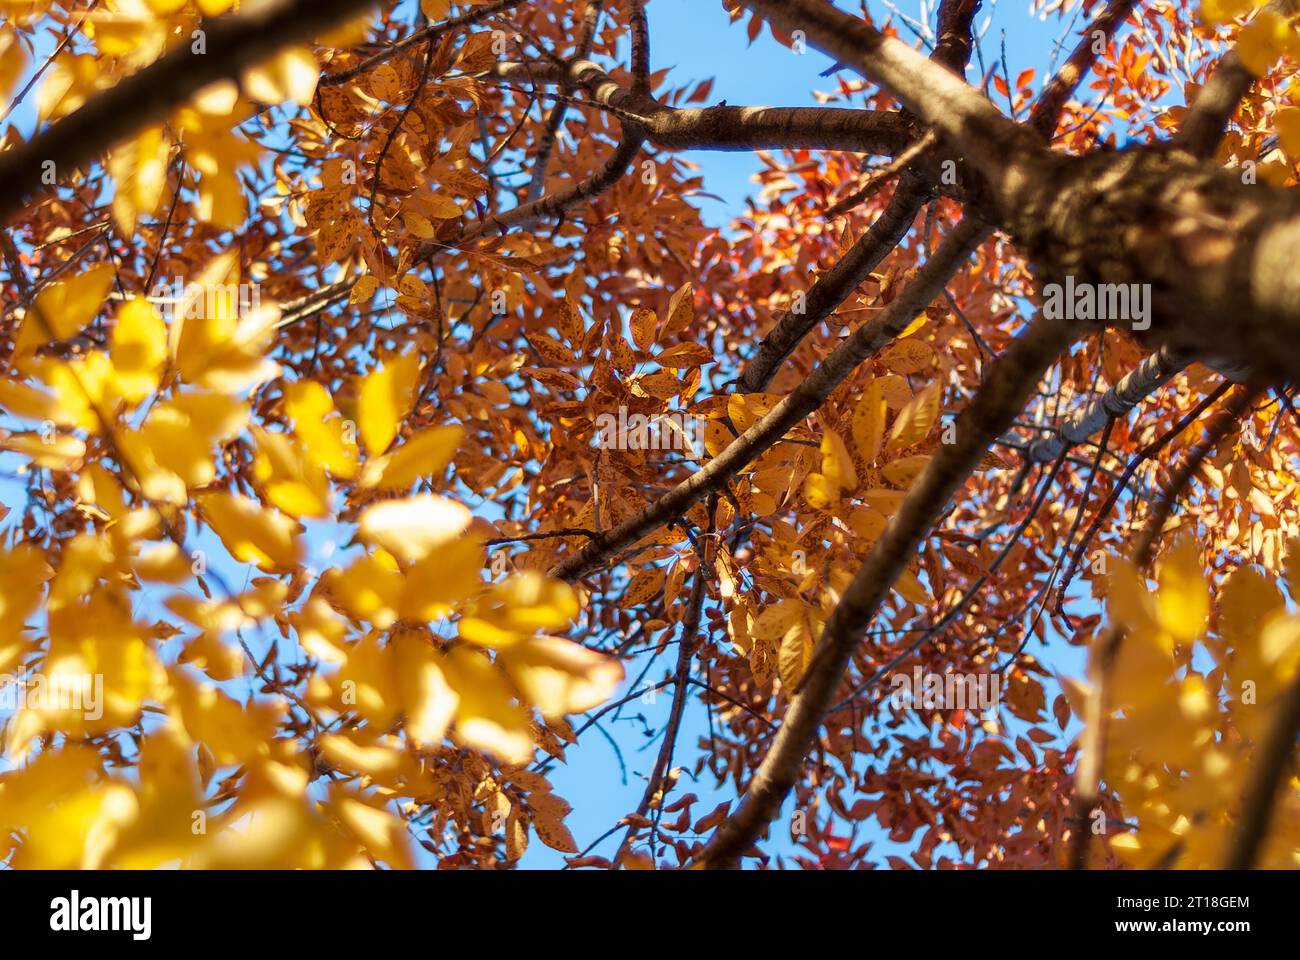 Looking up at spectacular orange fall colors in a three flowered maple tree Stock Photo